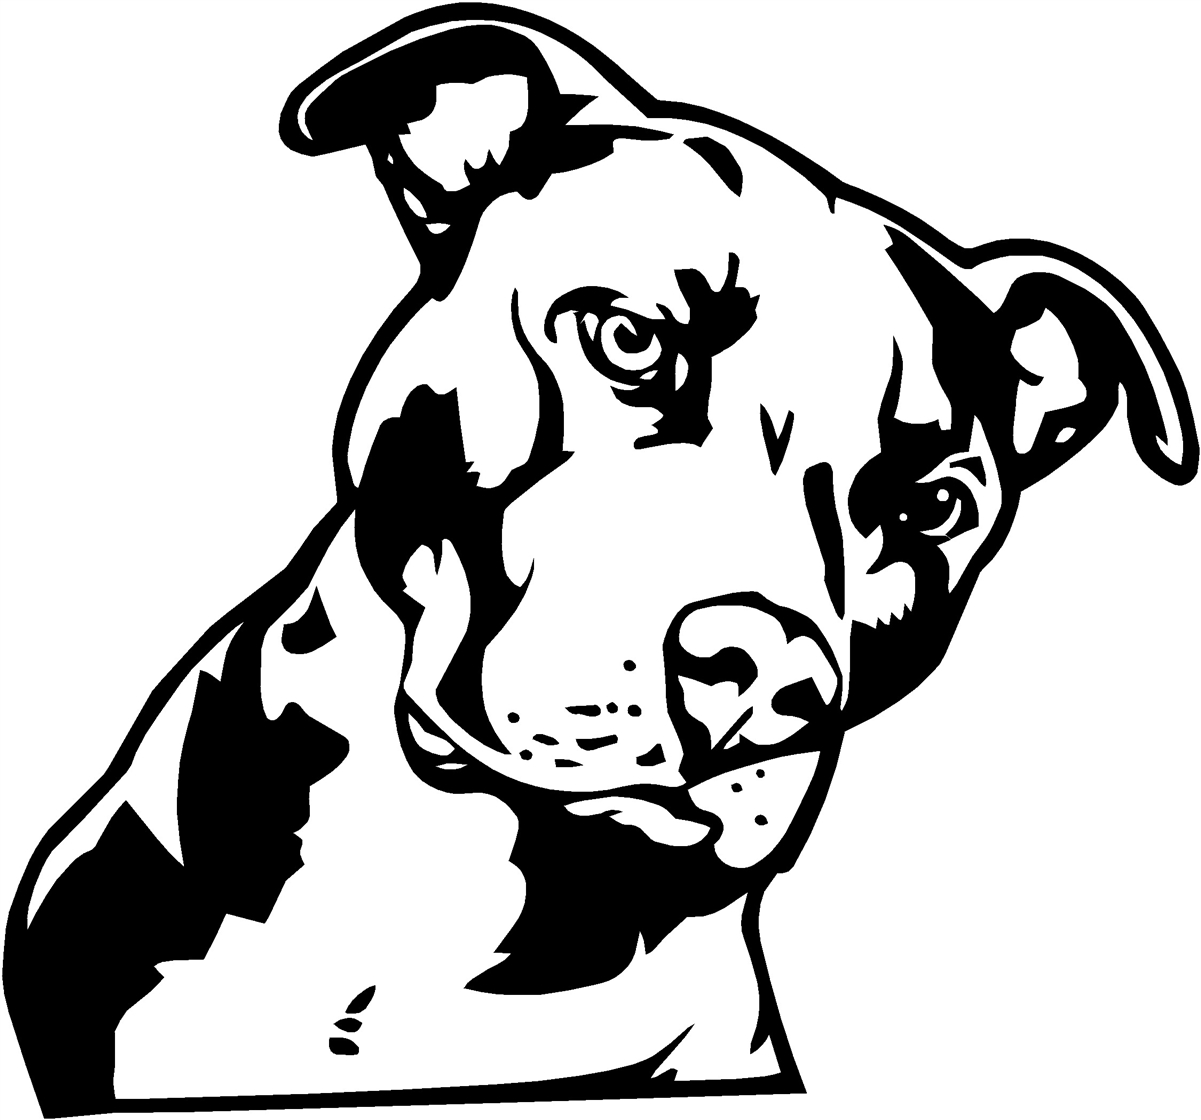 Free Pitbull Silhouette Vector, Download Free Pitbull Silhouette Vector